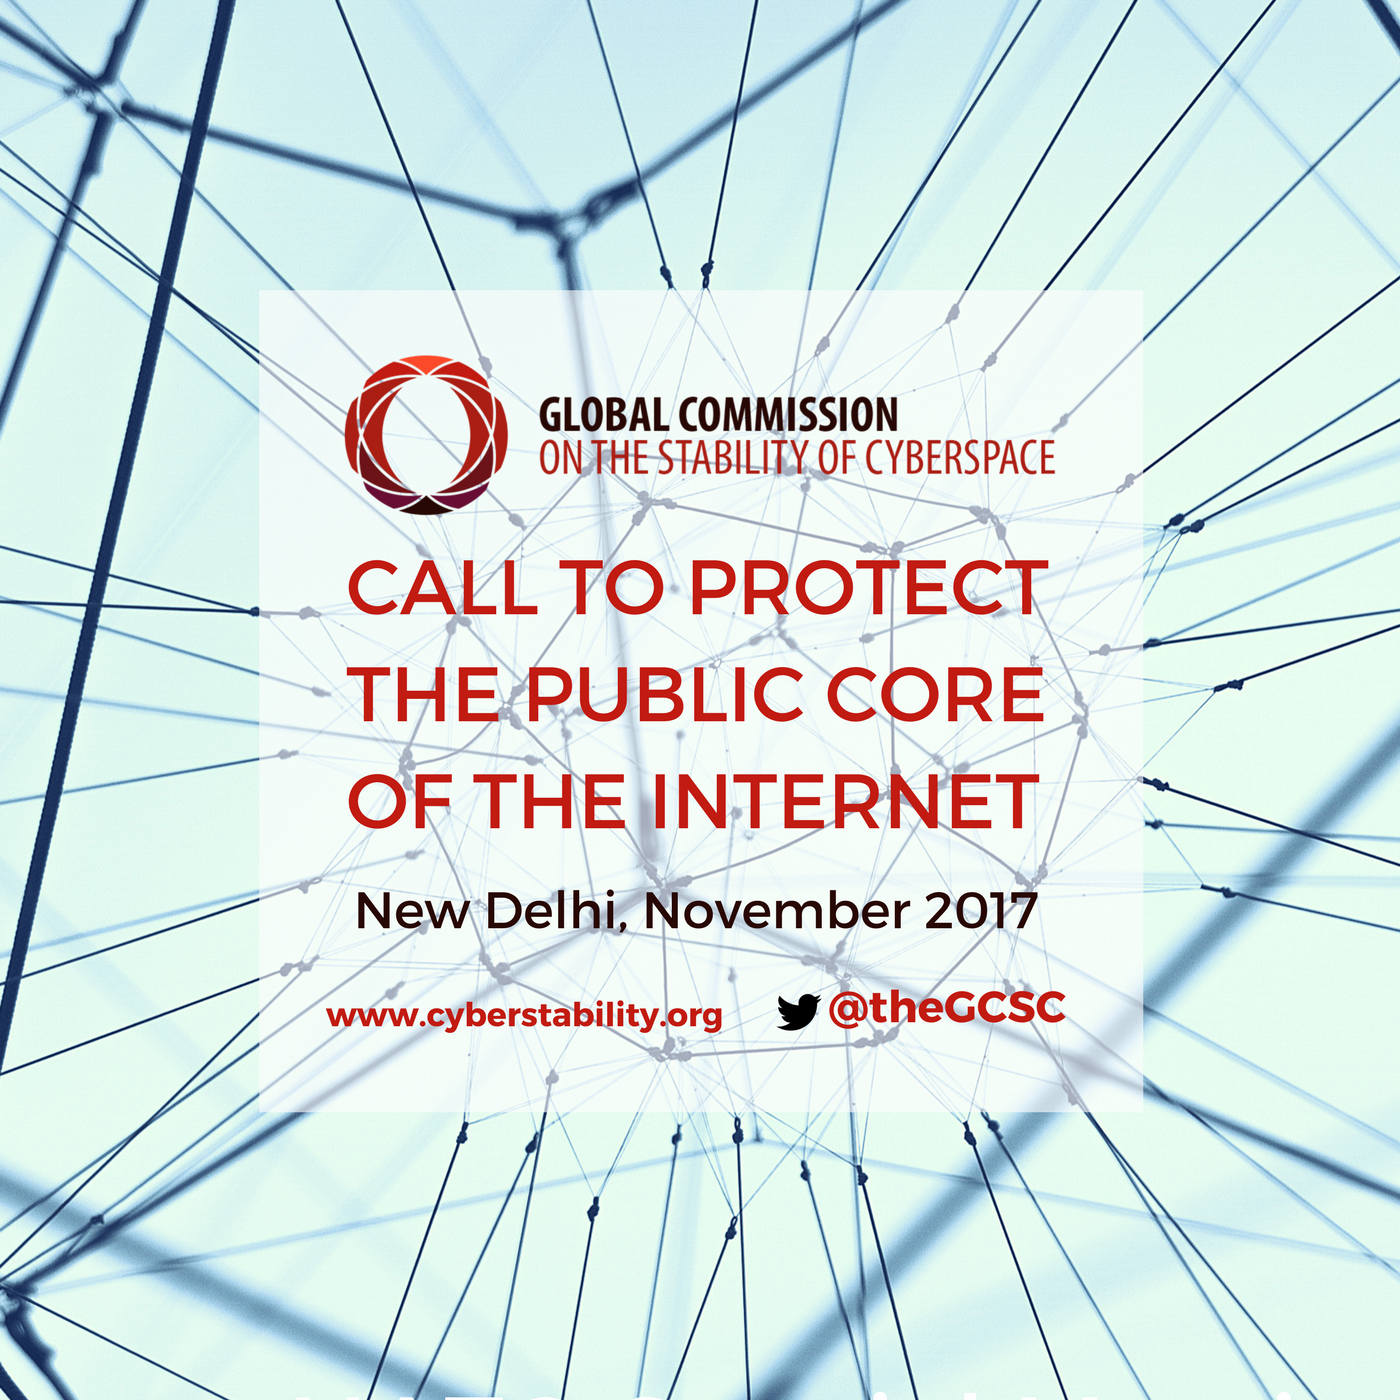 Global Commission Proposes Call to Protect the Public Core of the Internet